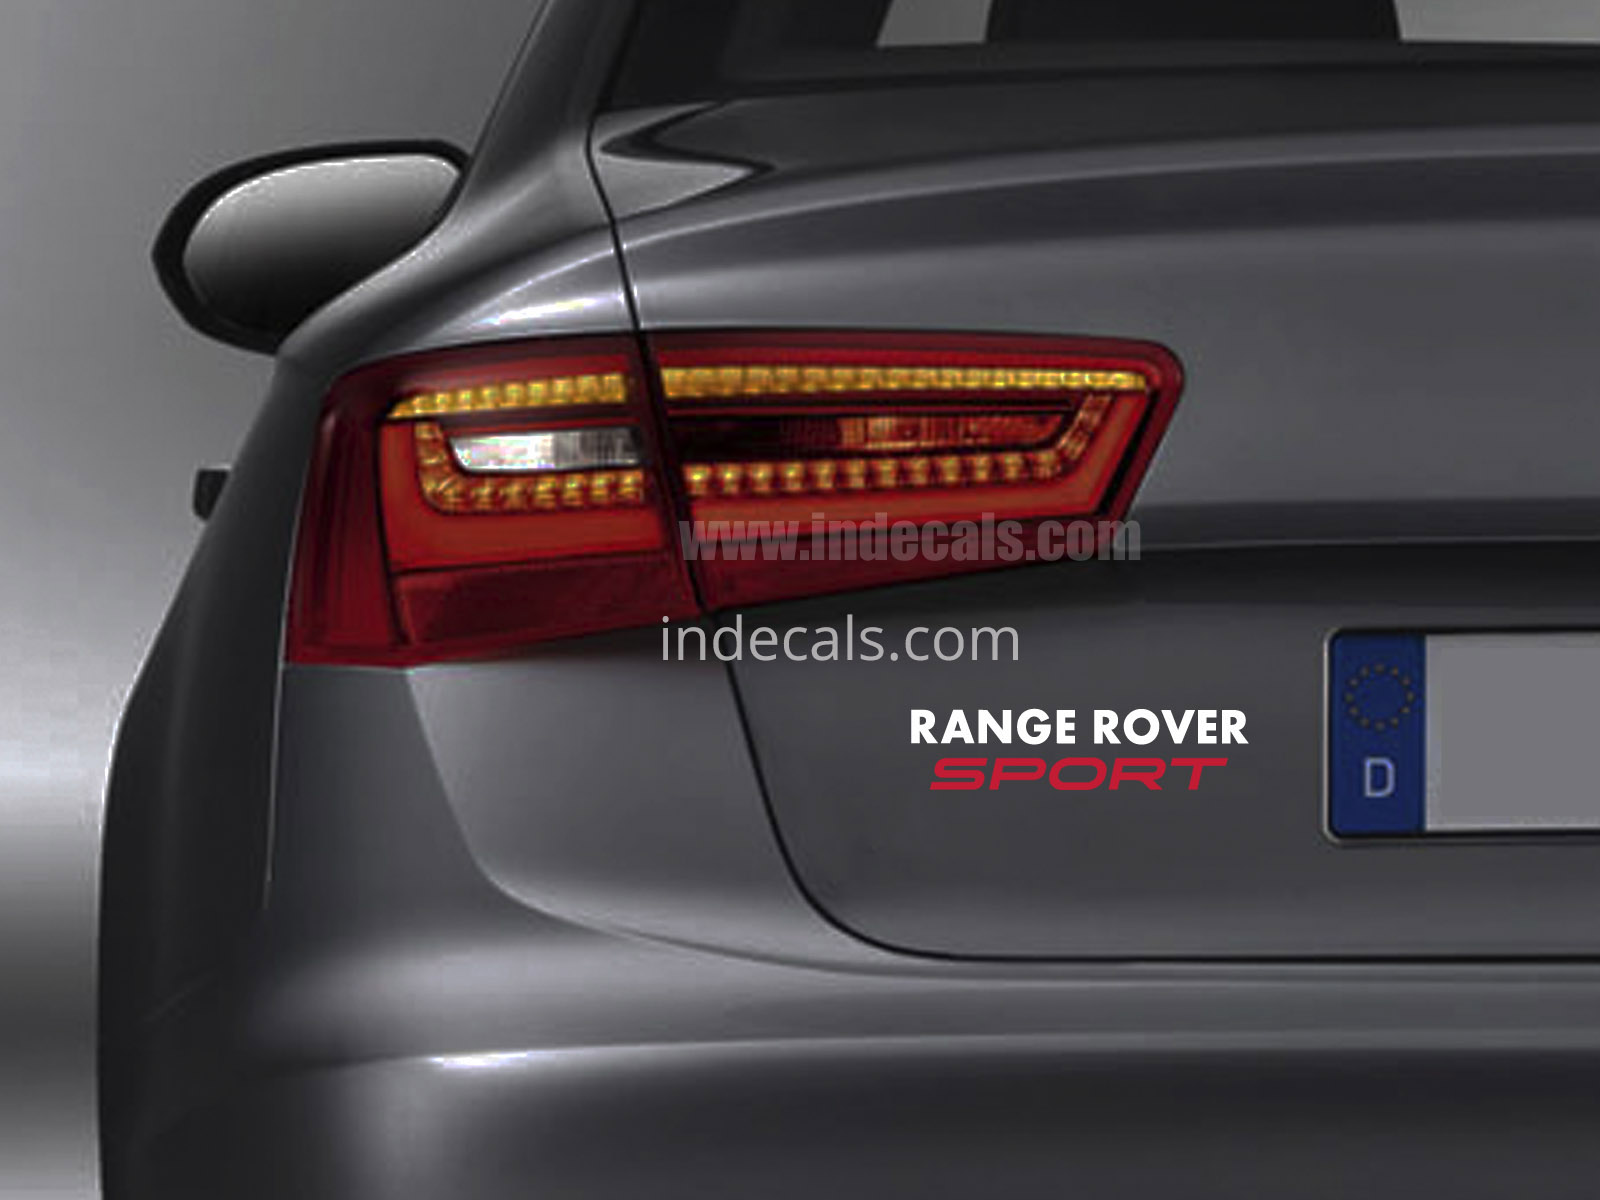 1 x Range Rover Sports Sticker for Trunk - White & Red